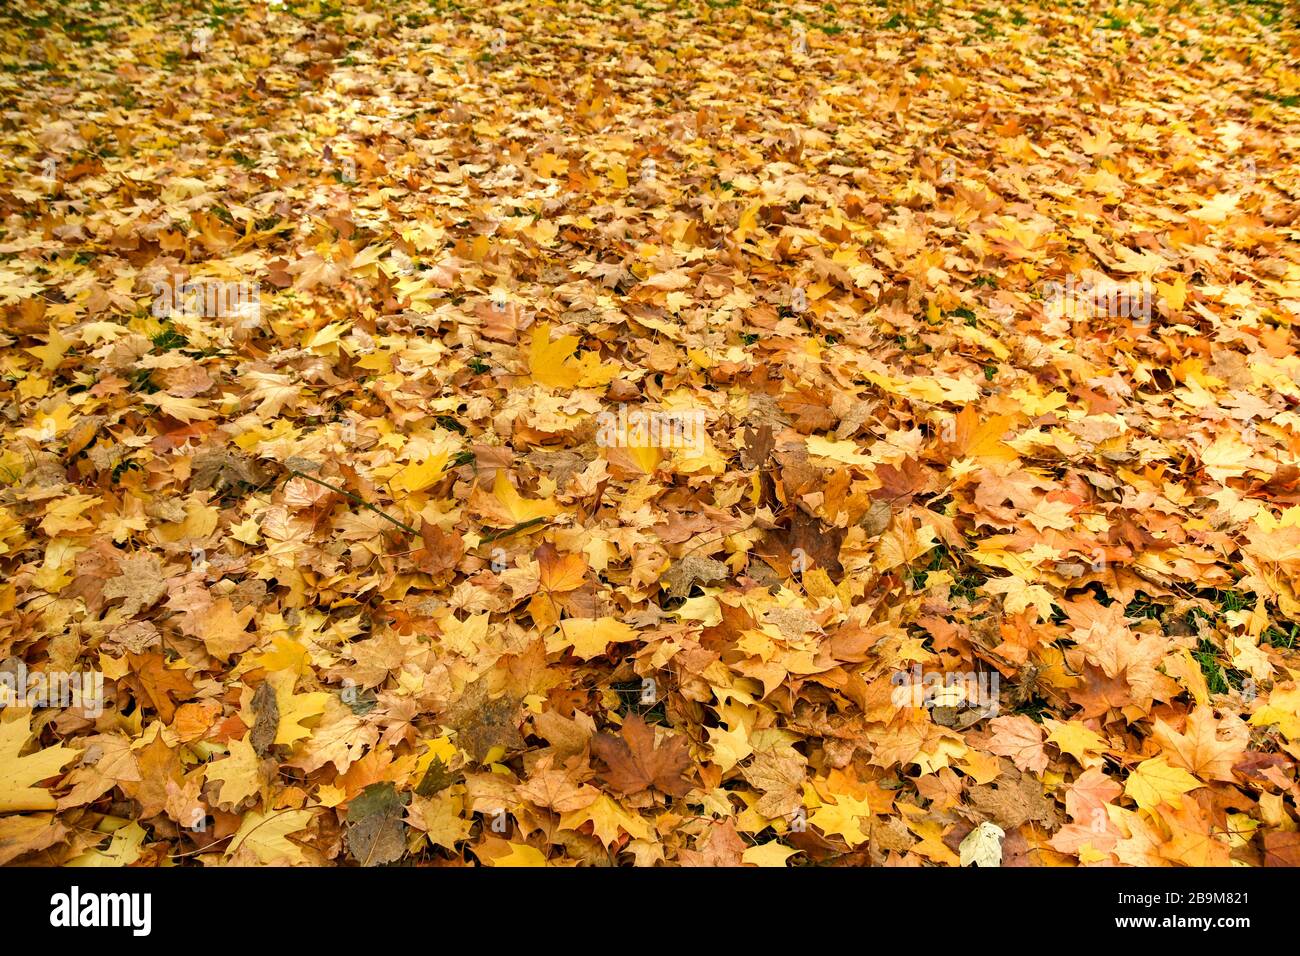 Carpet of dead leaves covering the ground in autumn Stock Photo